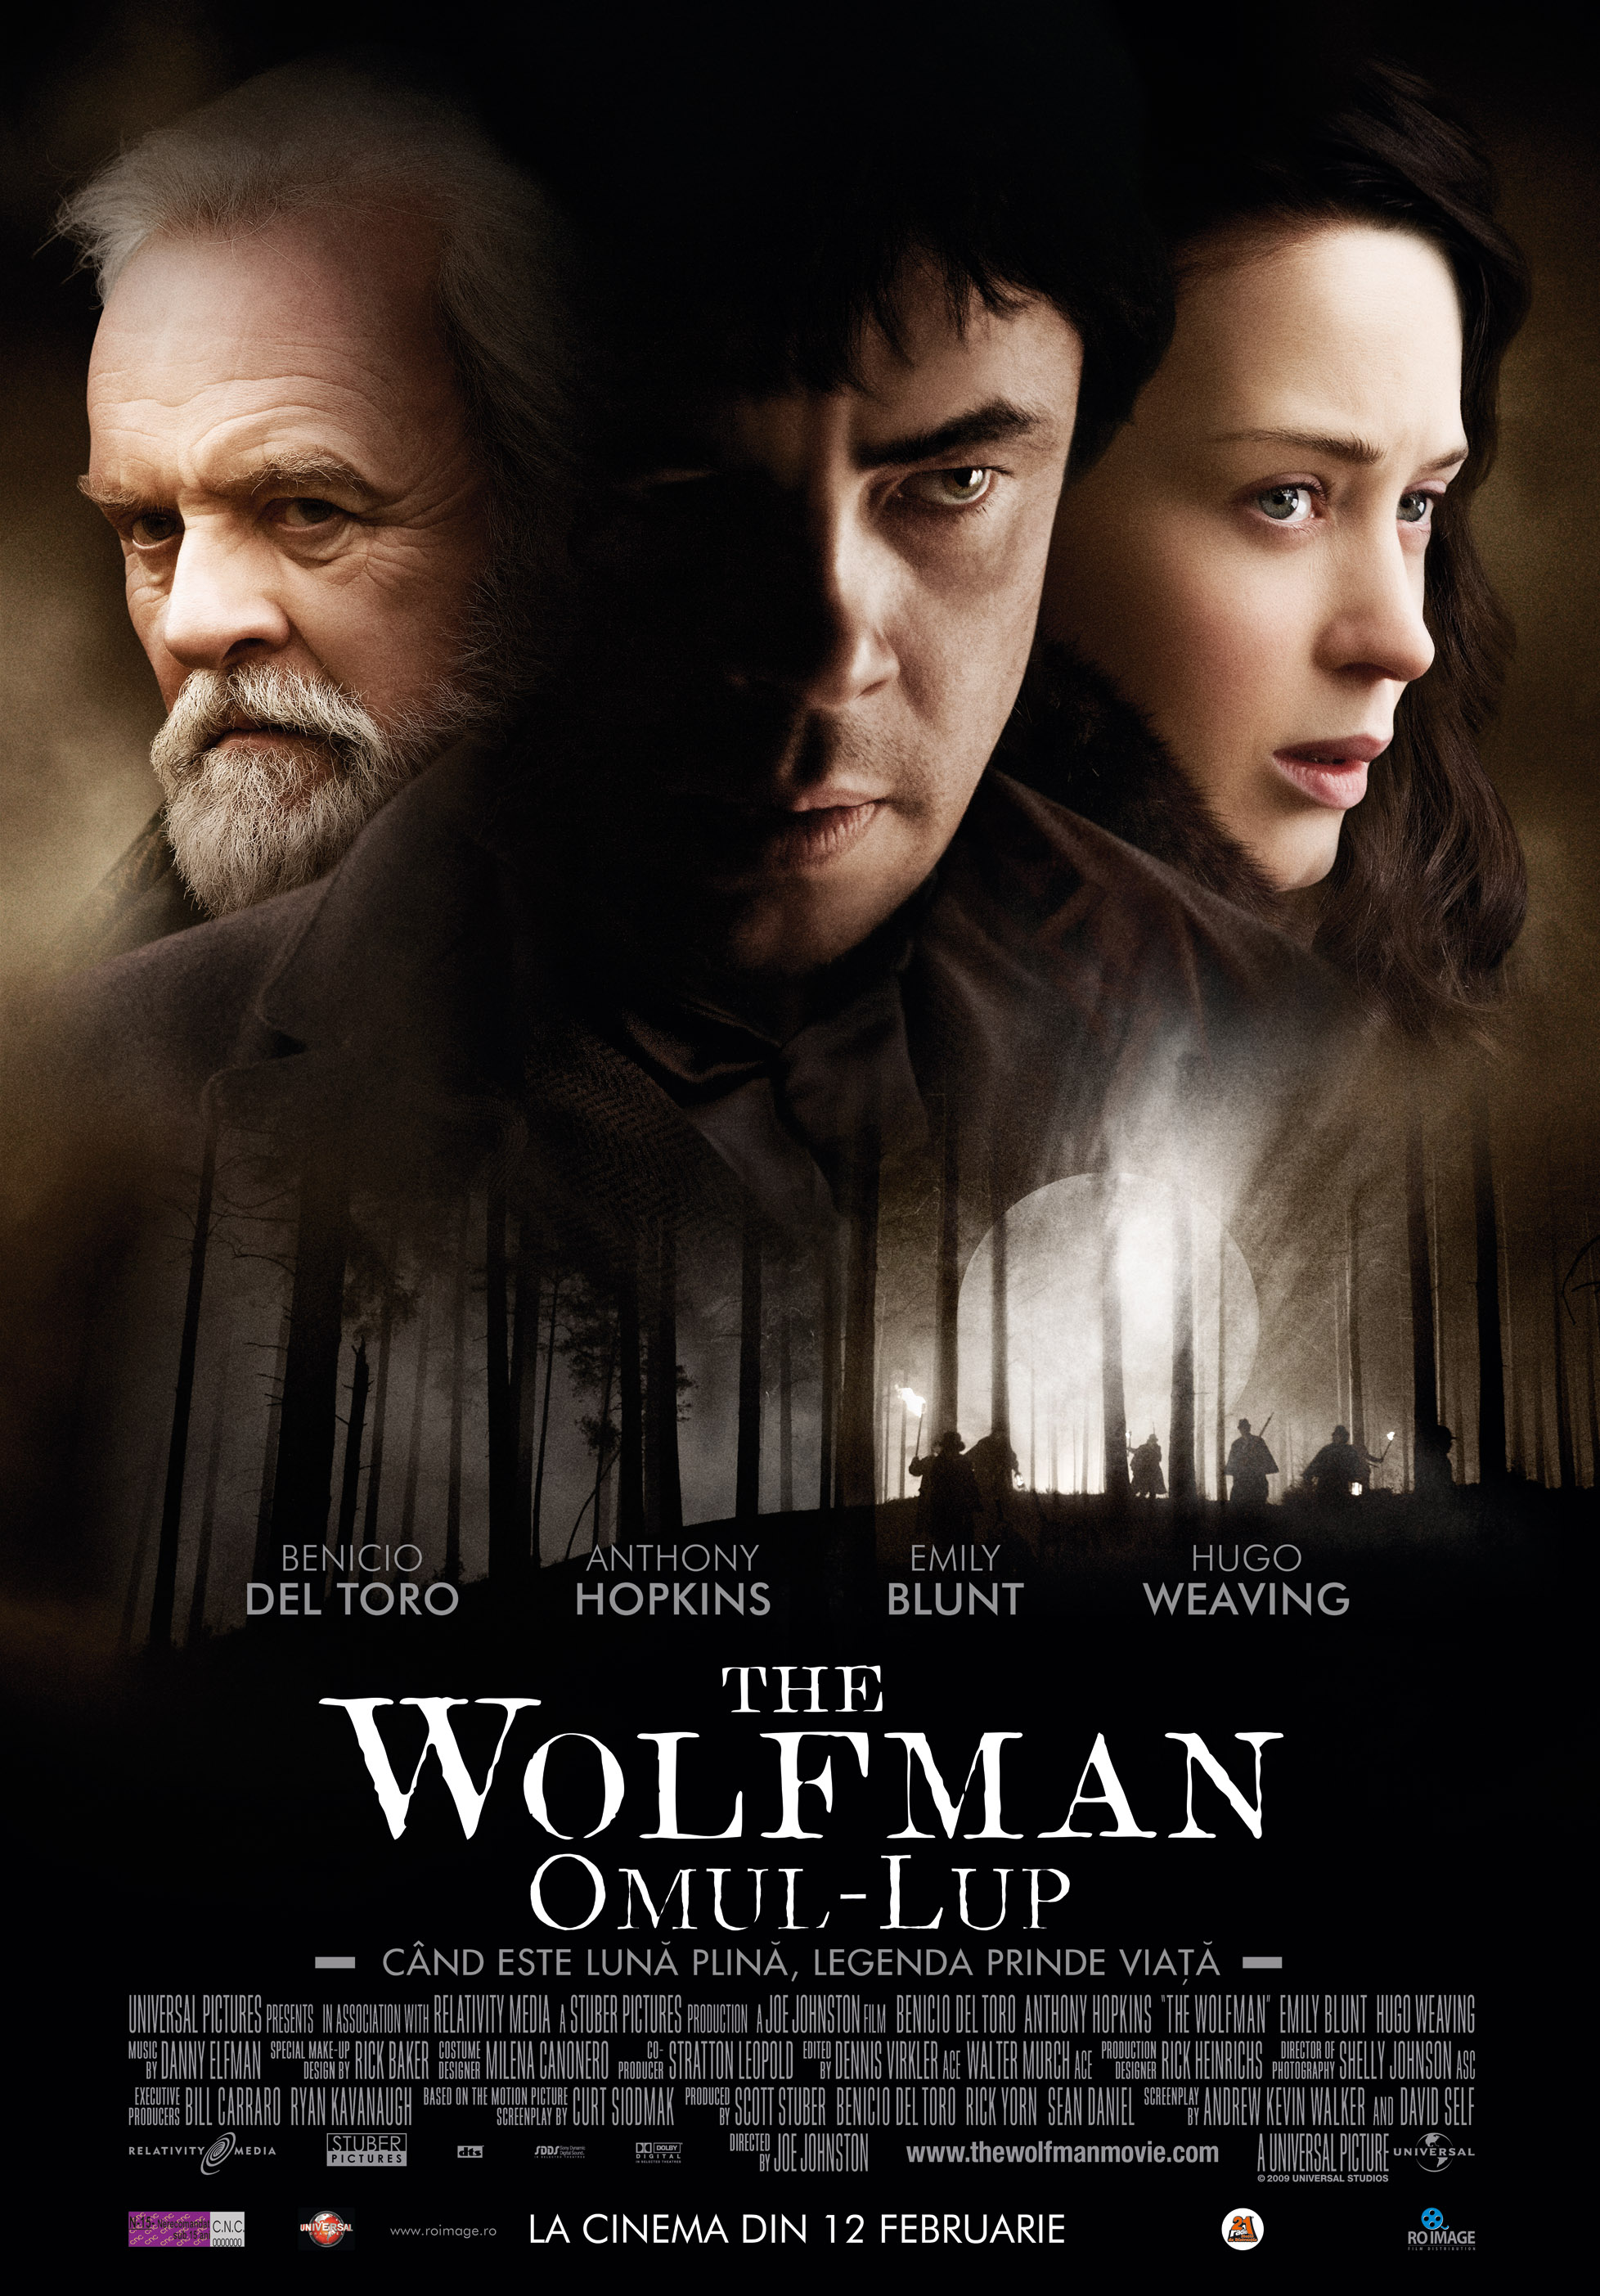 if you can tonight Michelangelo The Wolfman - Omul-lup (2010) - Film - CineMagia.ro